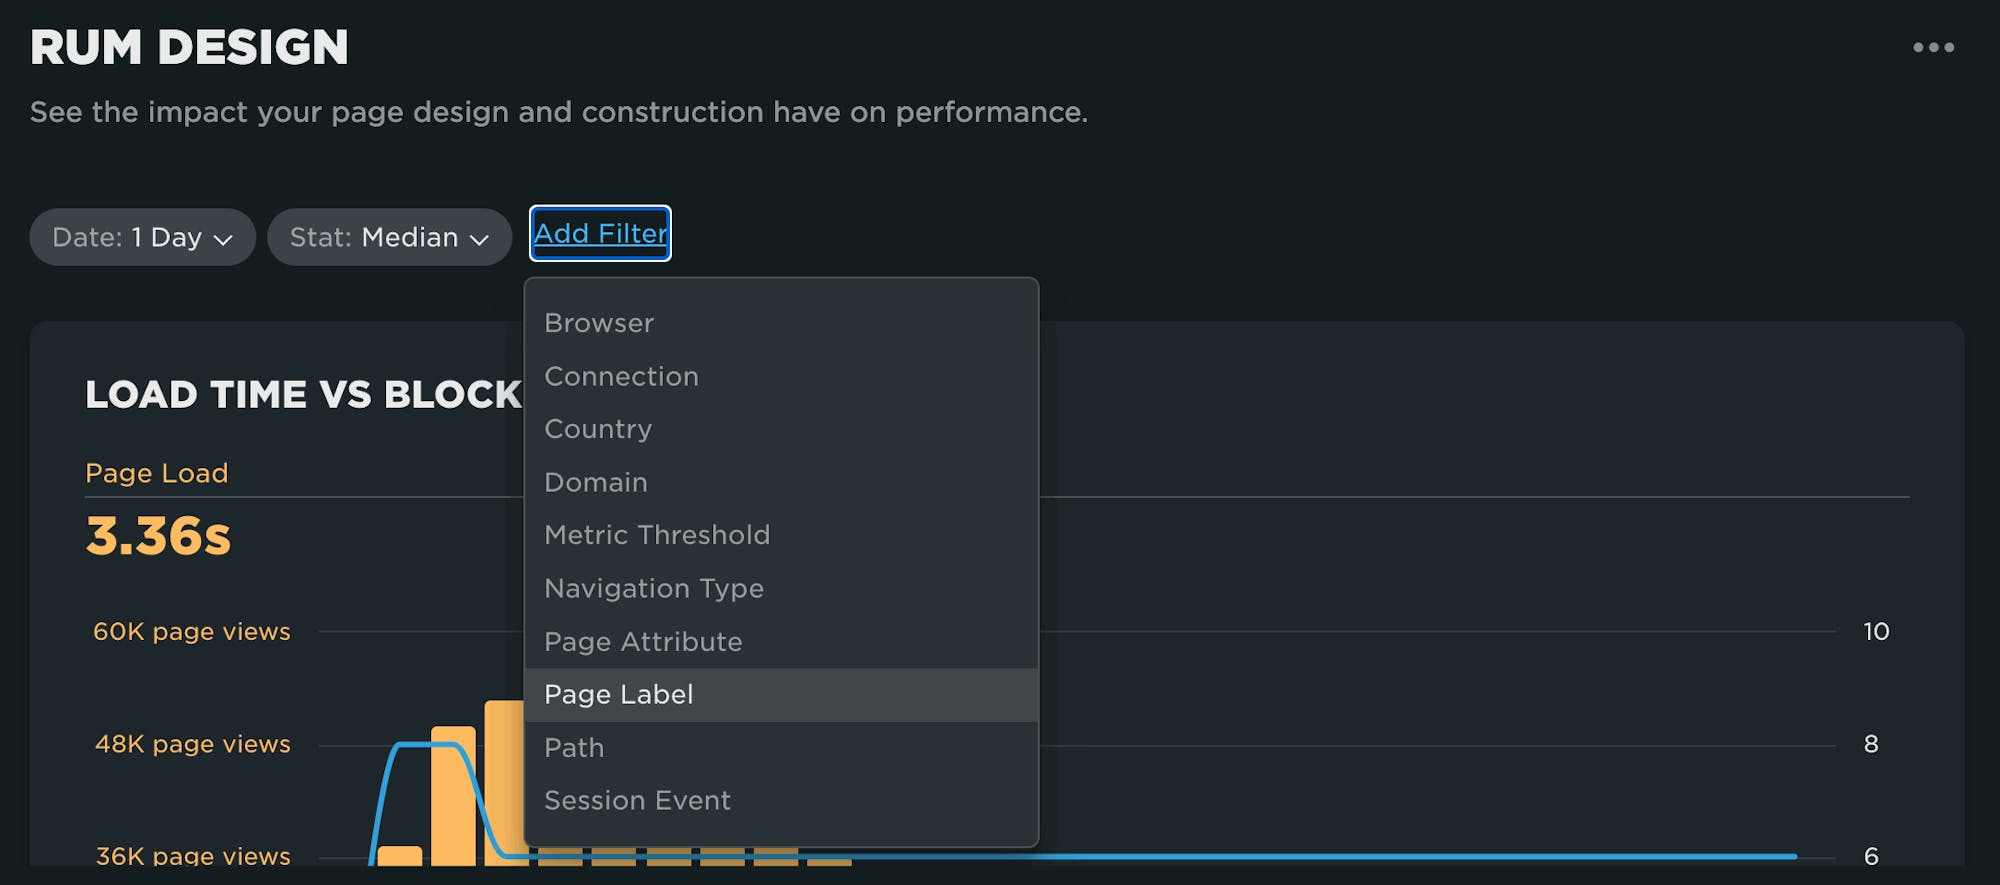 Dropdown filter on the Design dashboard showing a list of options with page label selected